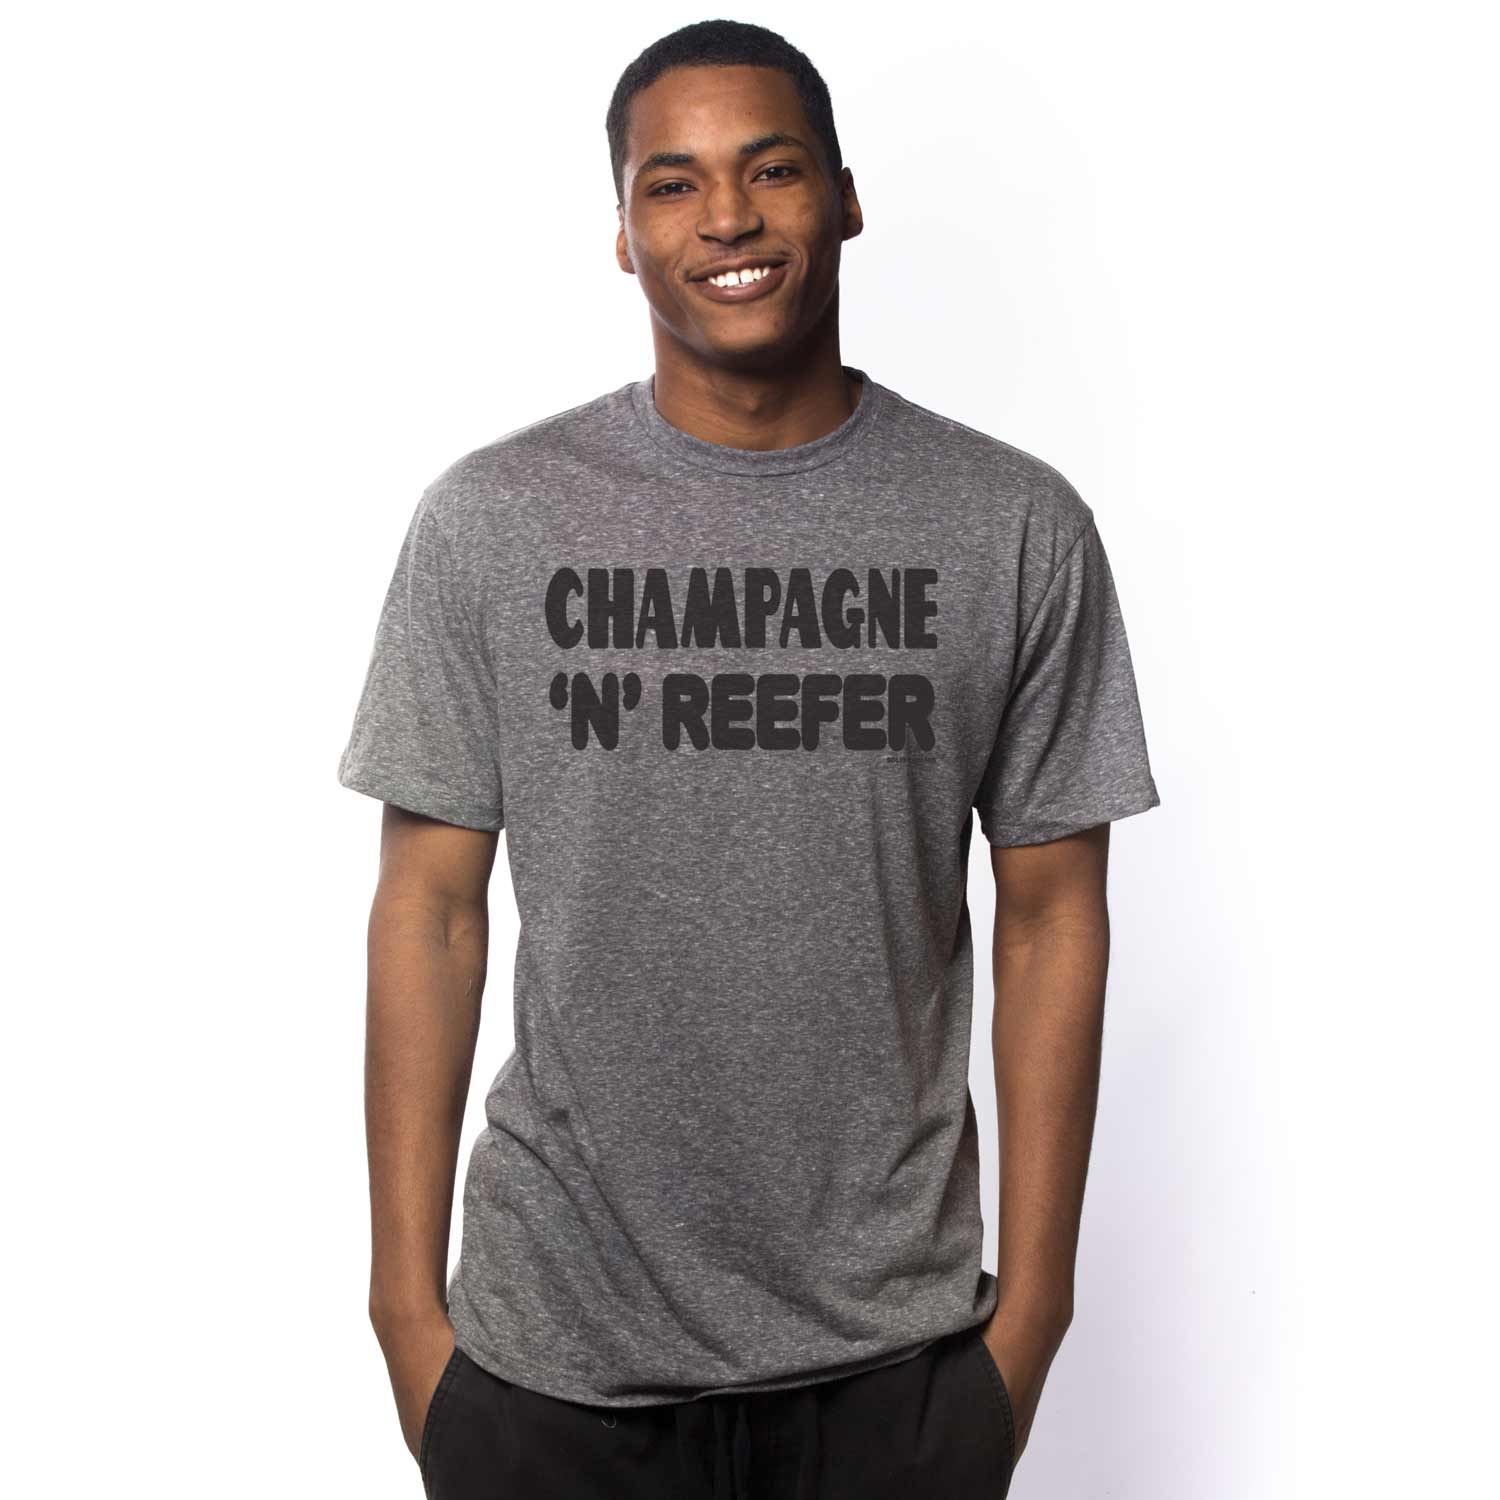 Men's Champagne & Reefer Cool Graphic T-Shirt | Vintage Partying Tee on Model | Solid Threads